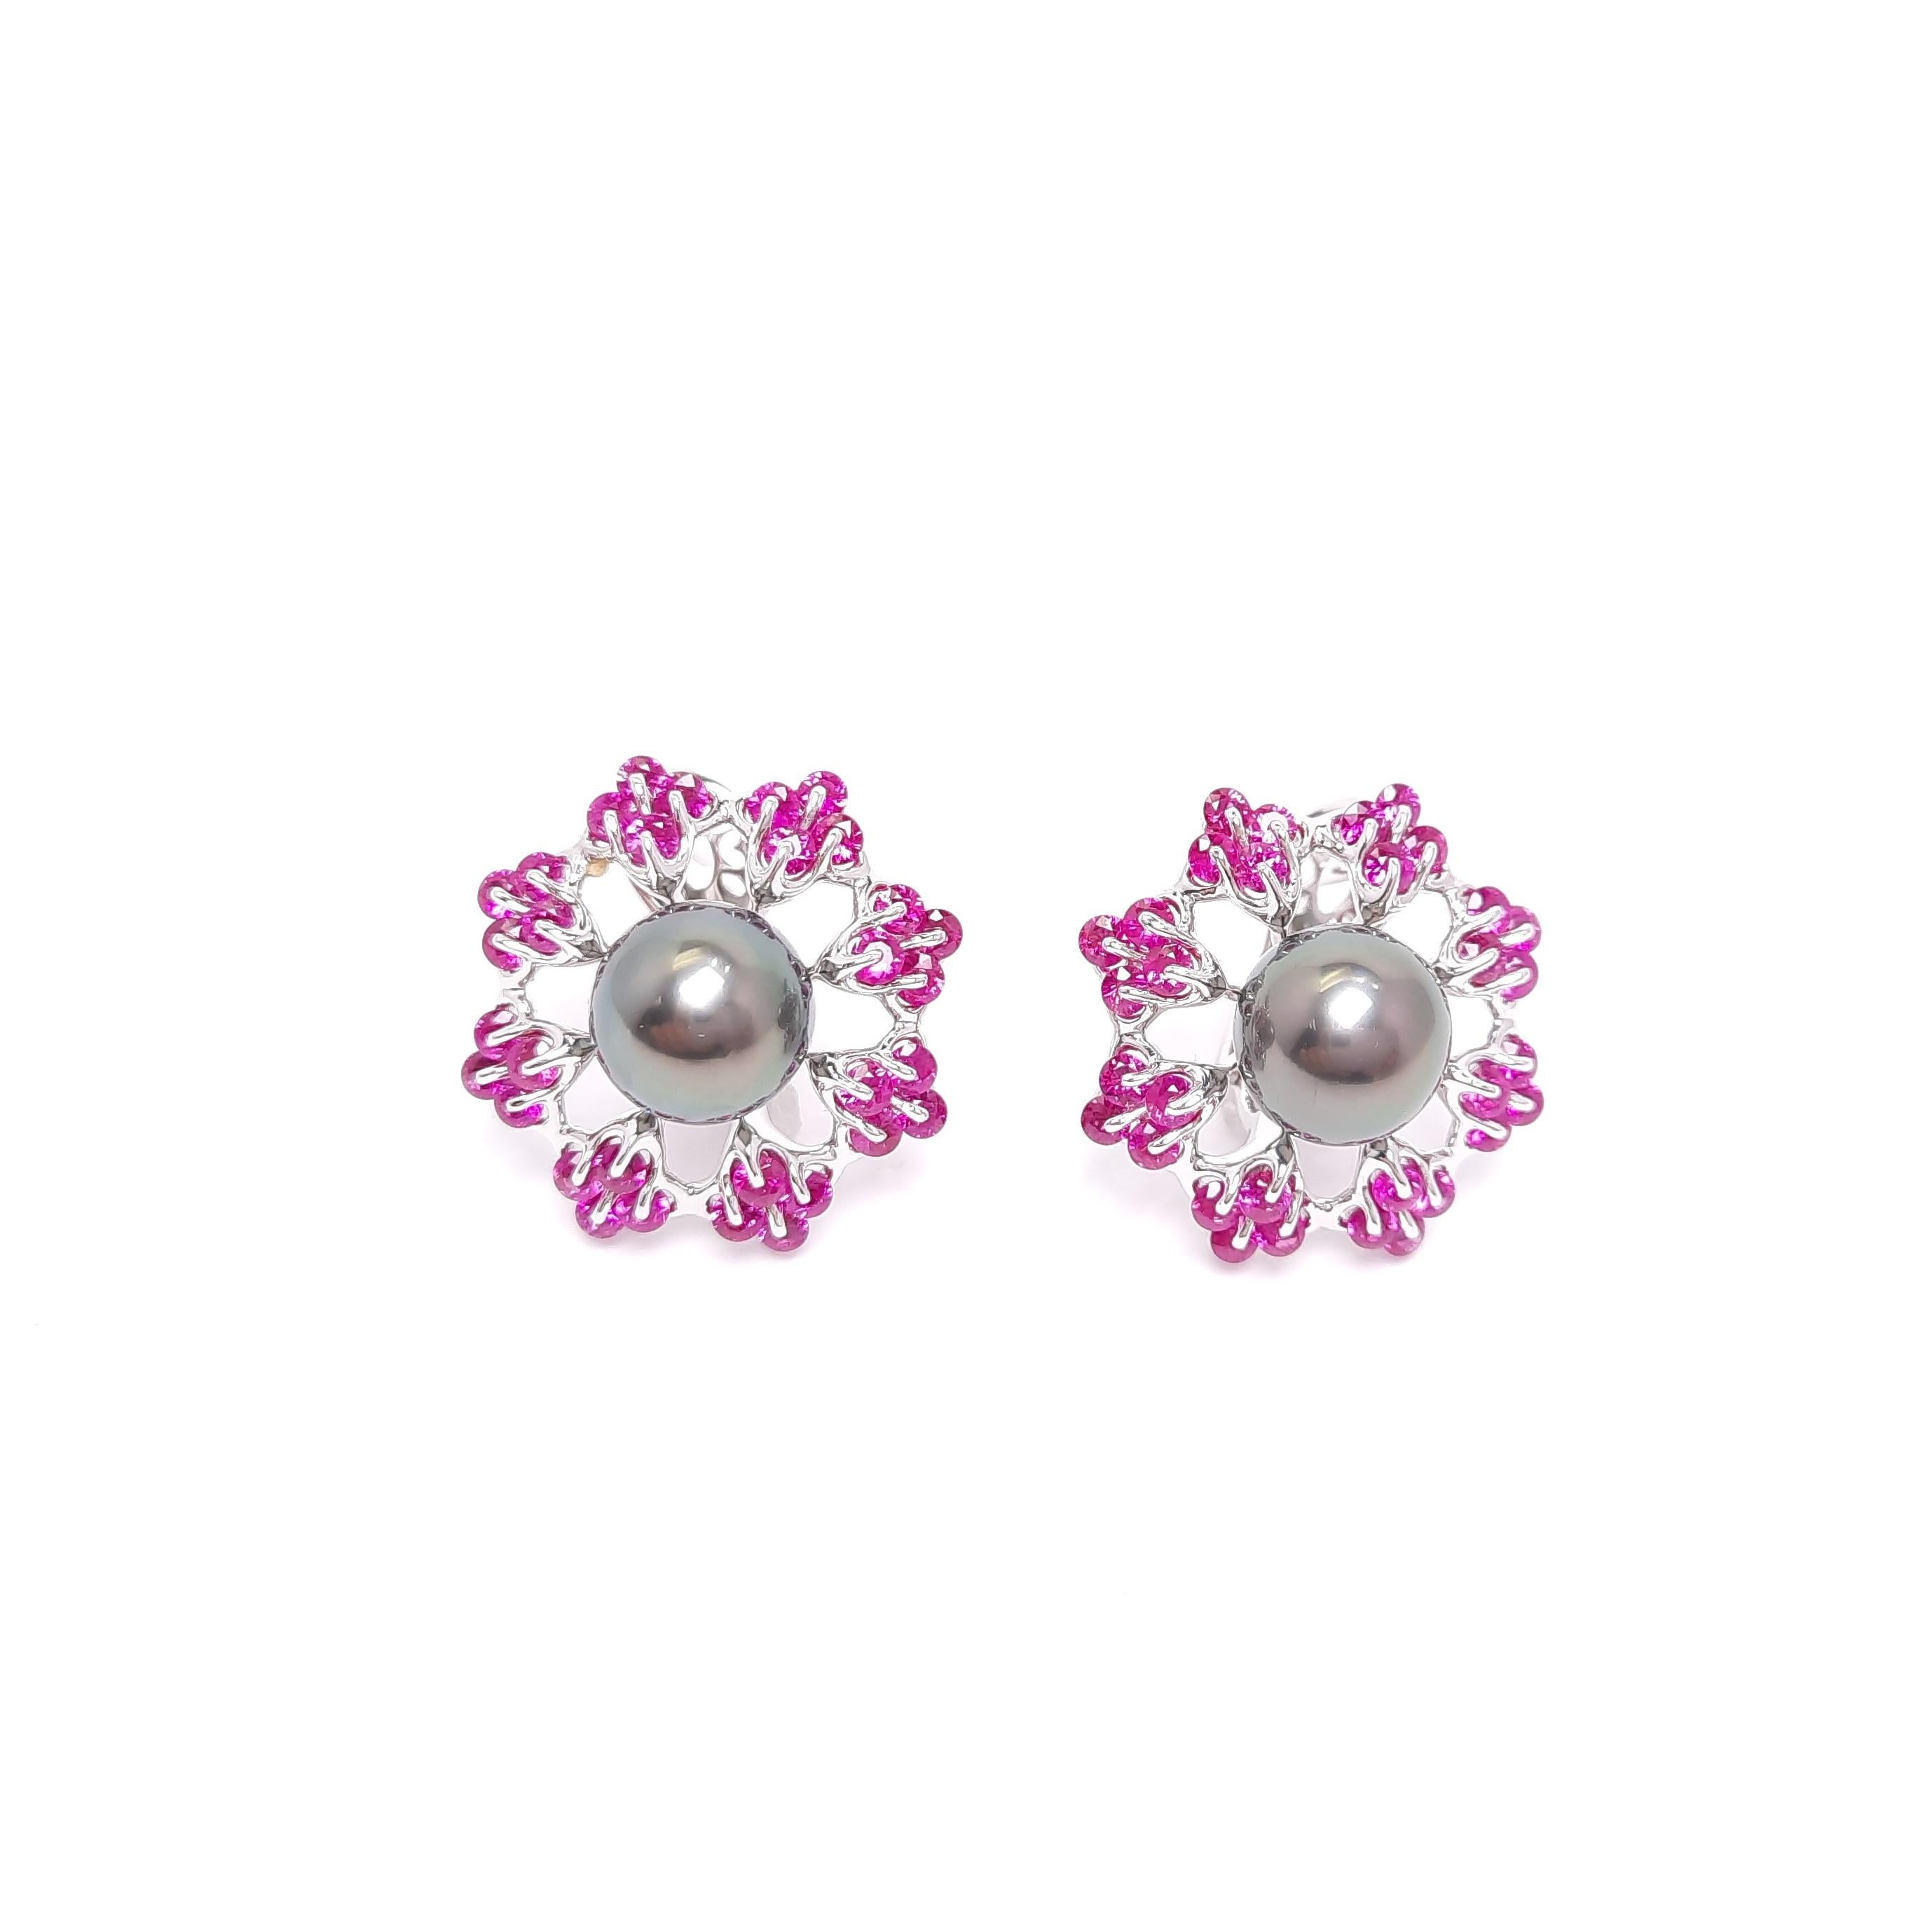 Inspired by famous Russian Ballet, this Prima Star Ruby and Tahiti Pearl Earrings created by MOISEIKIN® charm your day with the outstanding brilliant glow. The design is created  with the patented stone setting technology  